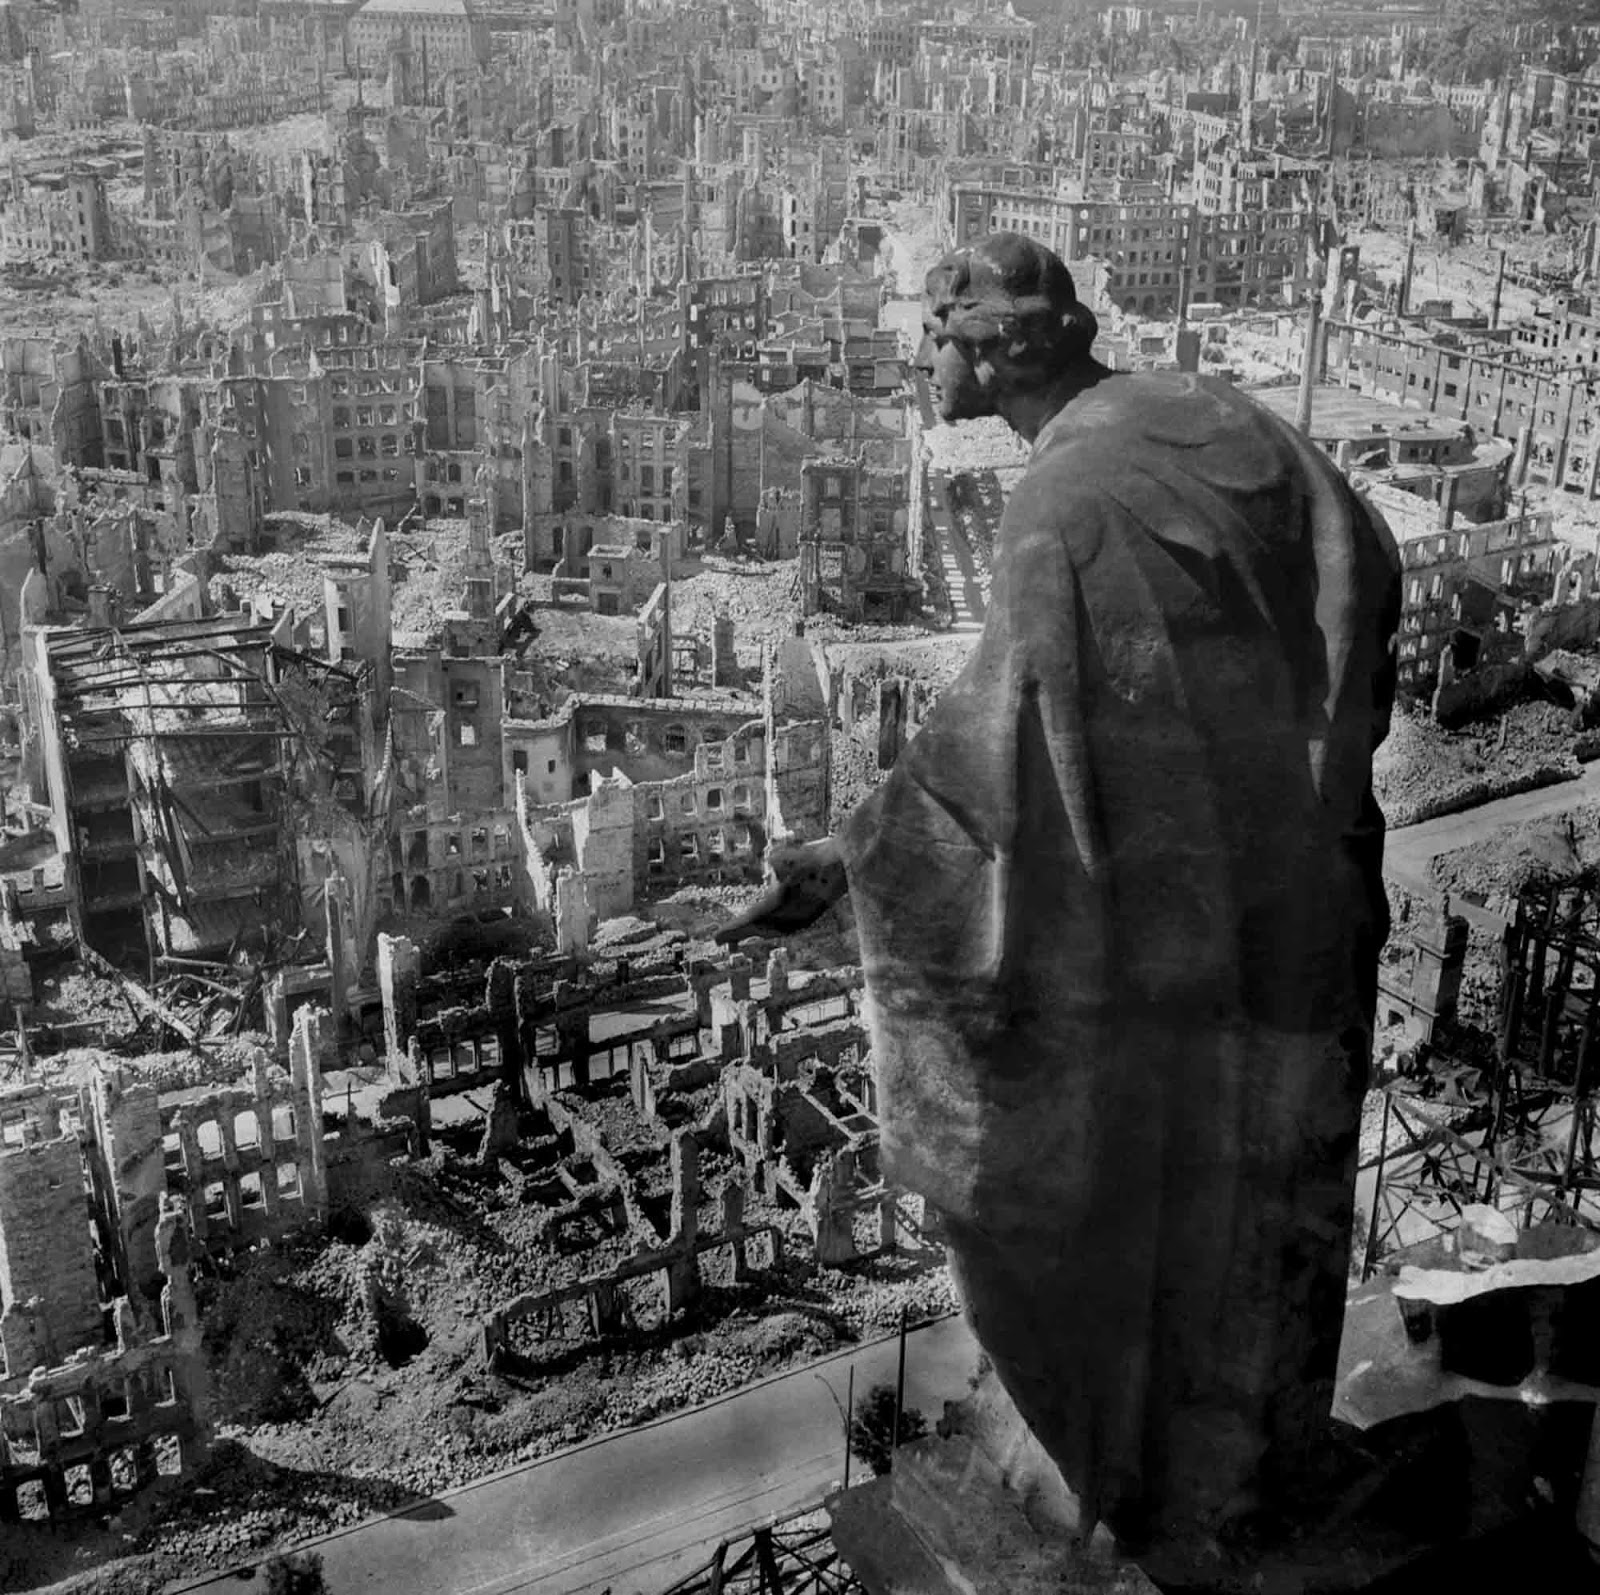 Dresden in ruins after Allied bombings, February 1945.